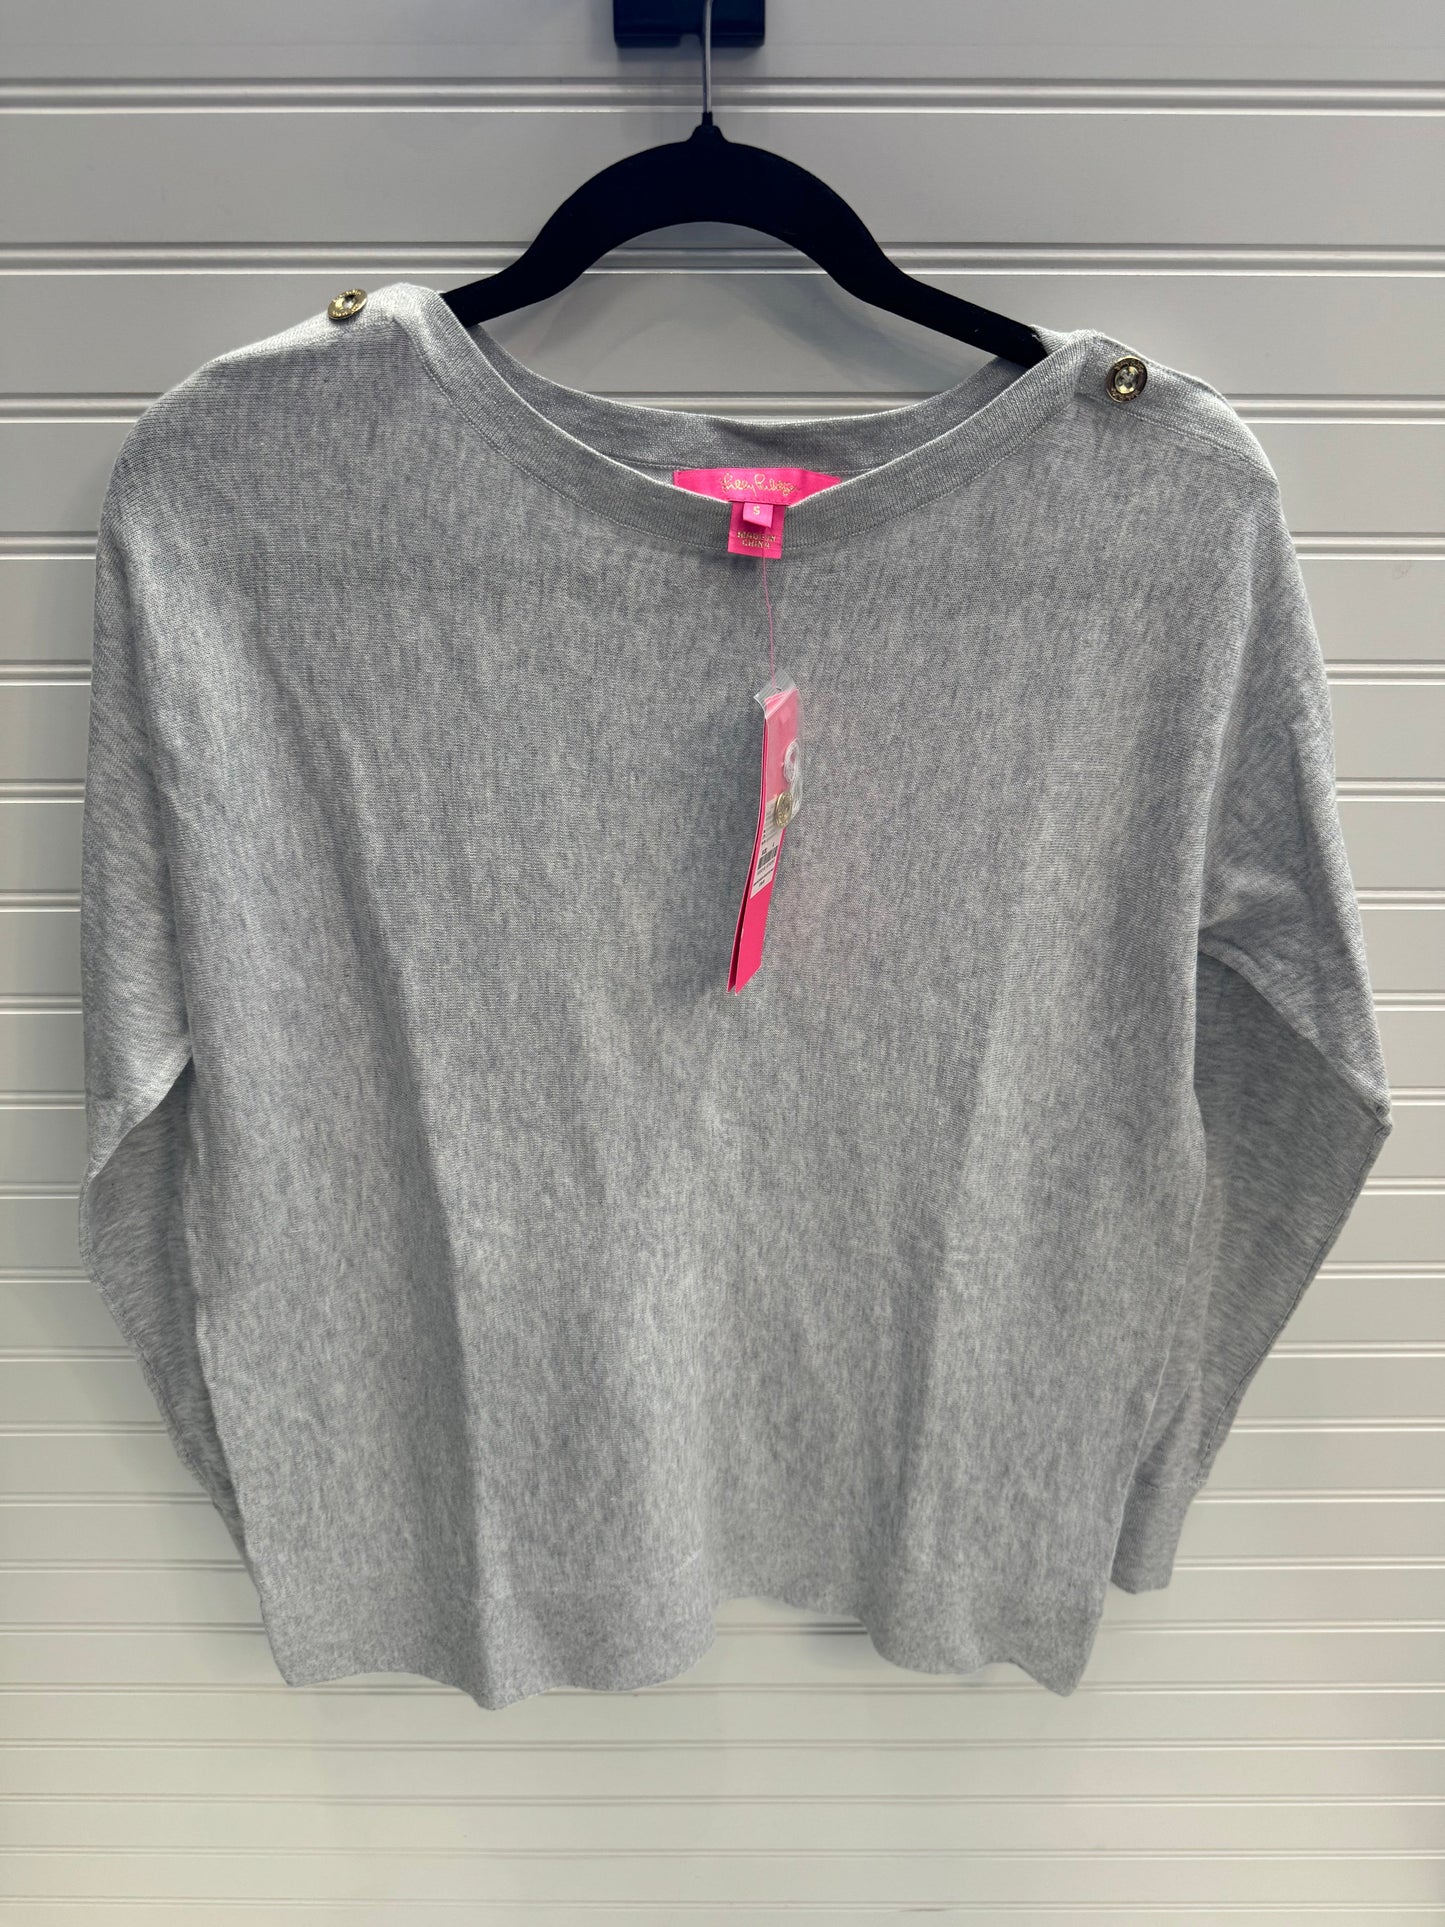 Grey Sweater Designer Lilly Pulitzer, Size S